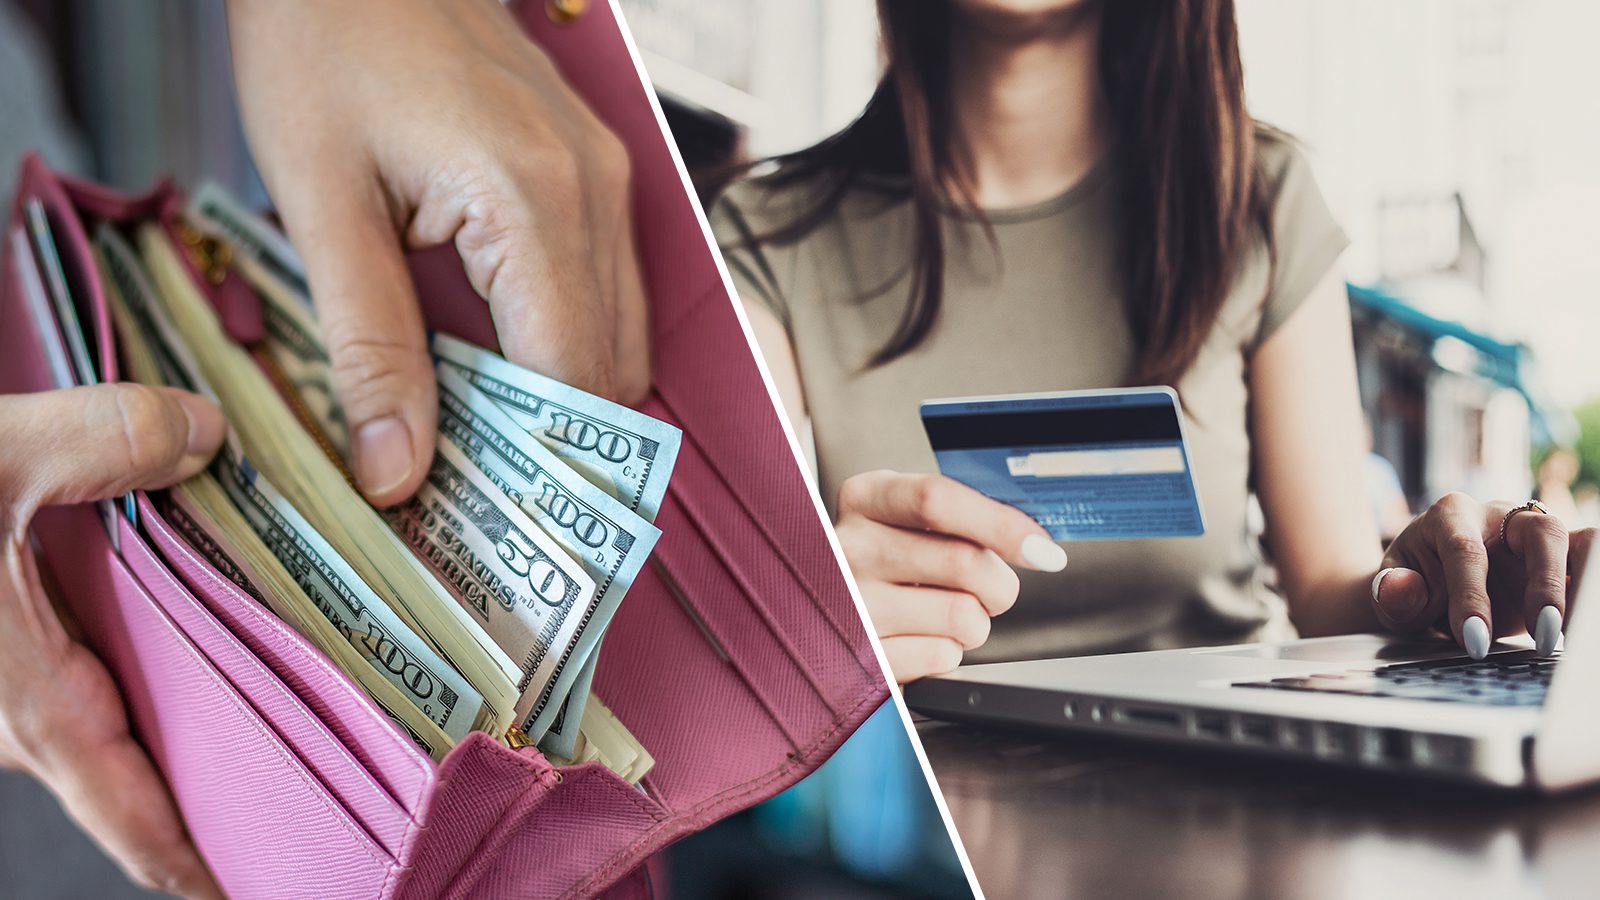 6 Signs of a Compulsive Spender Most People Don’t Realize